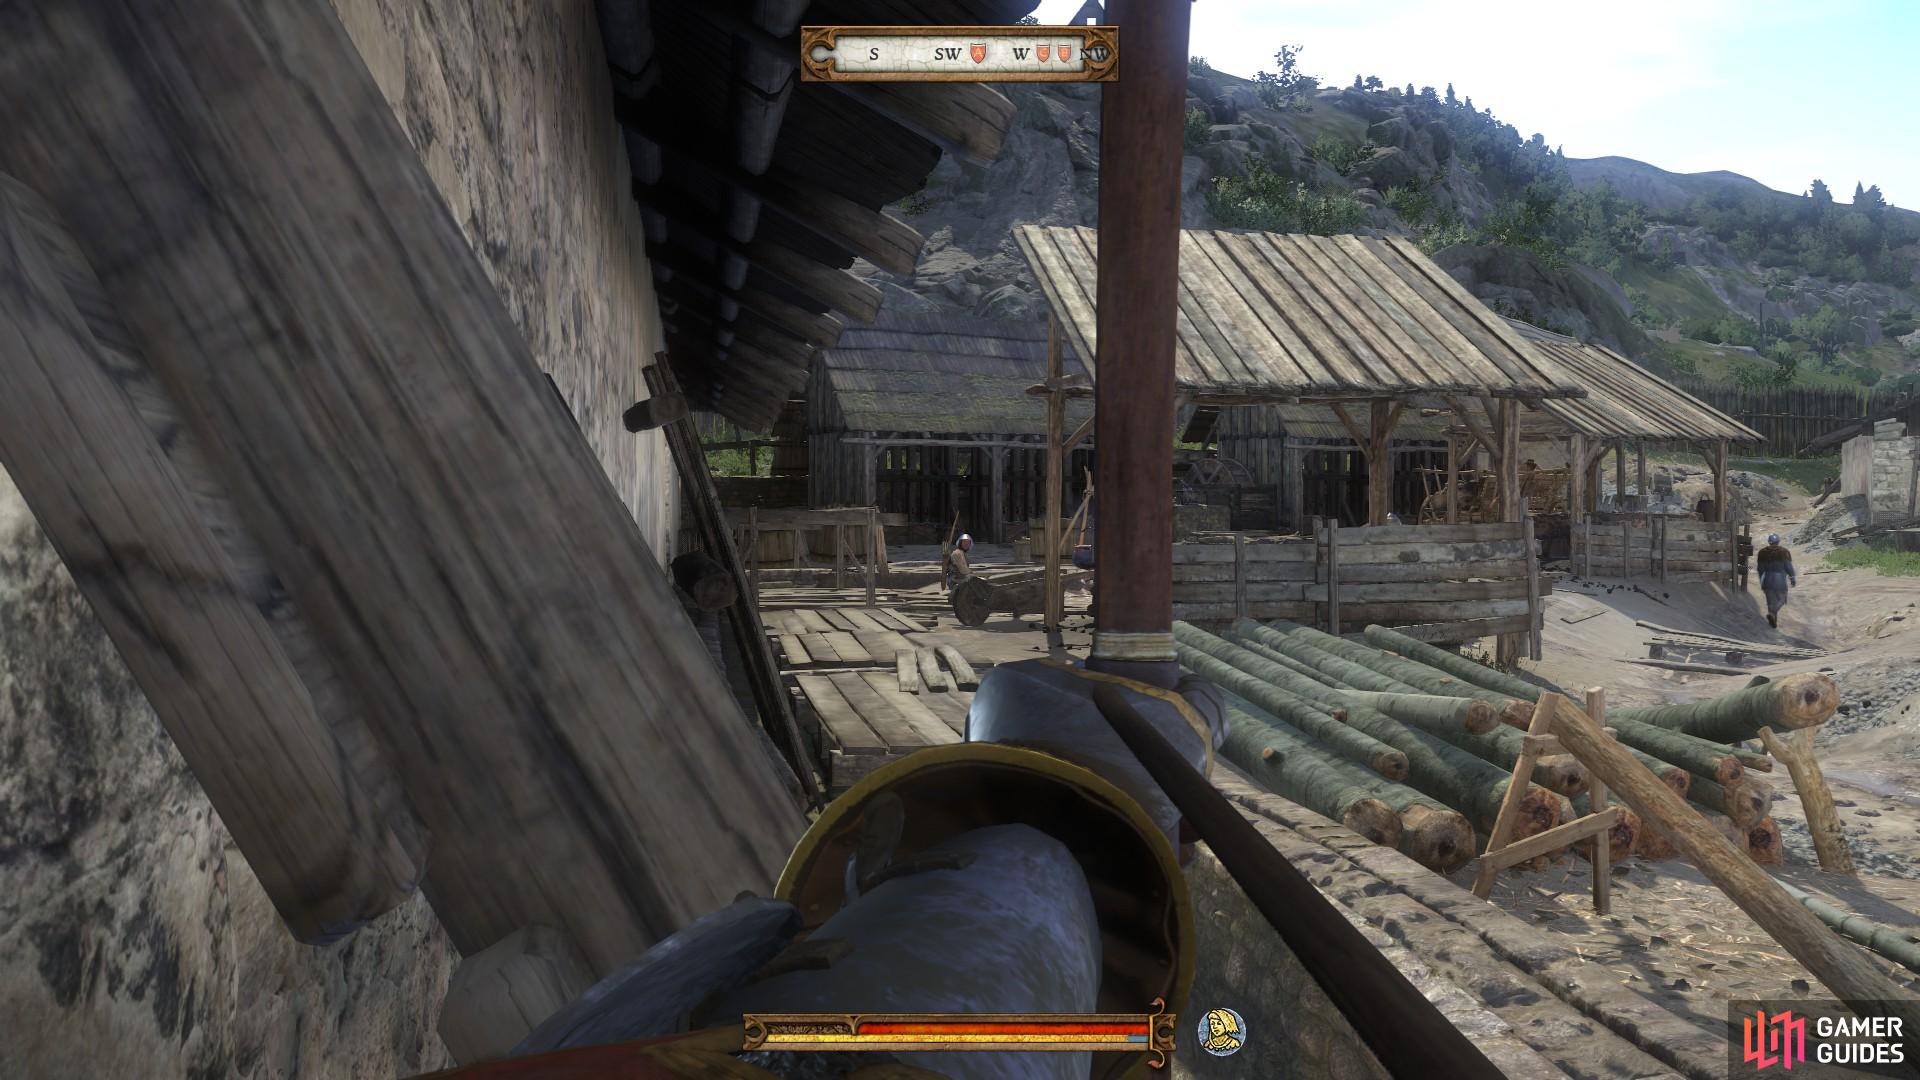 When you reach the ore processing yard, there is no way to fully inspect it without killing the bandits there.